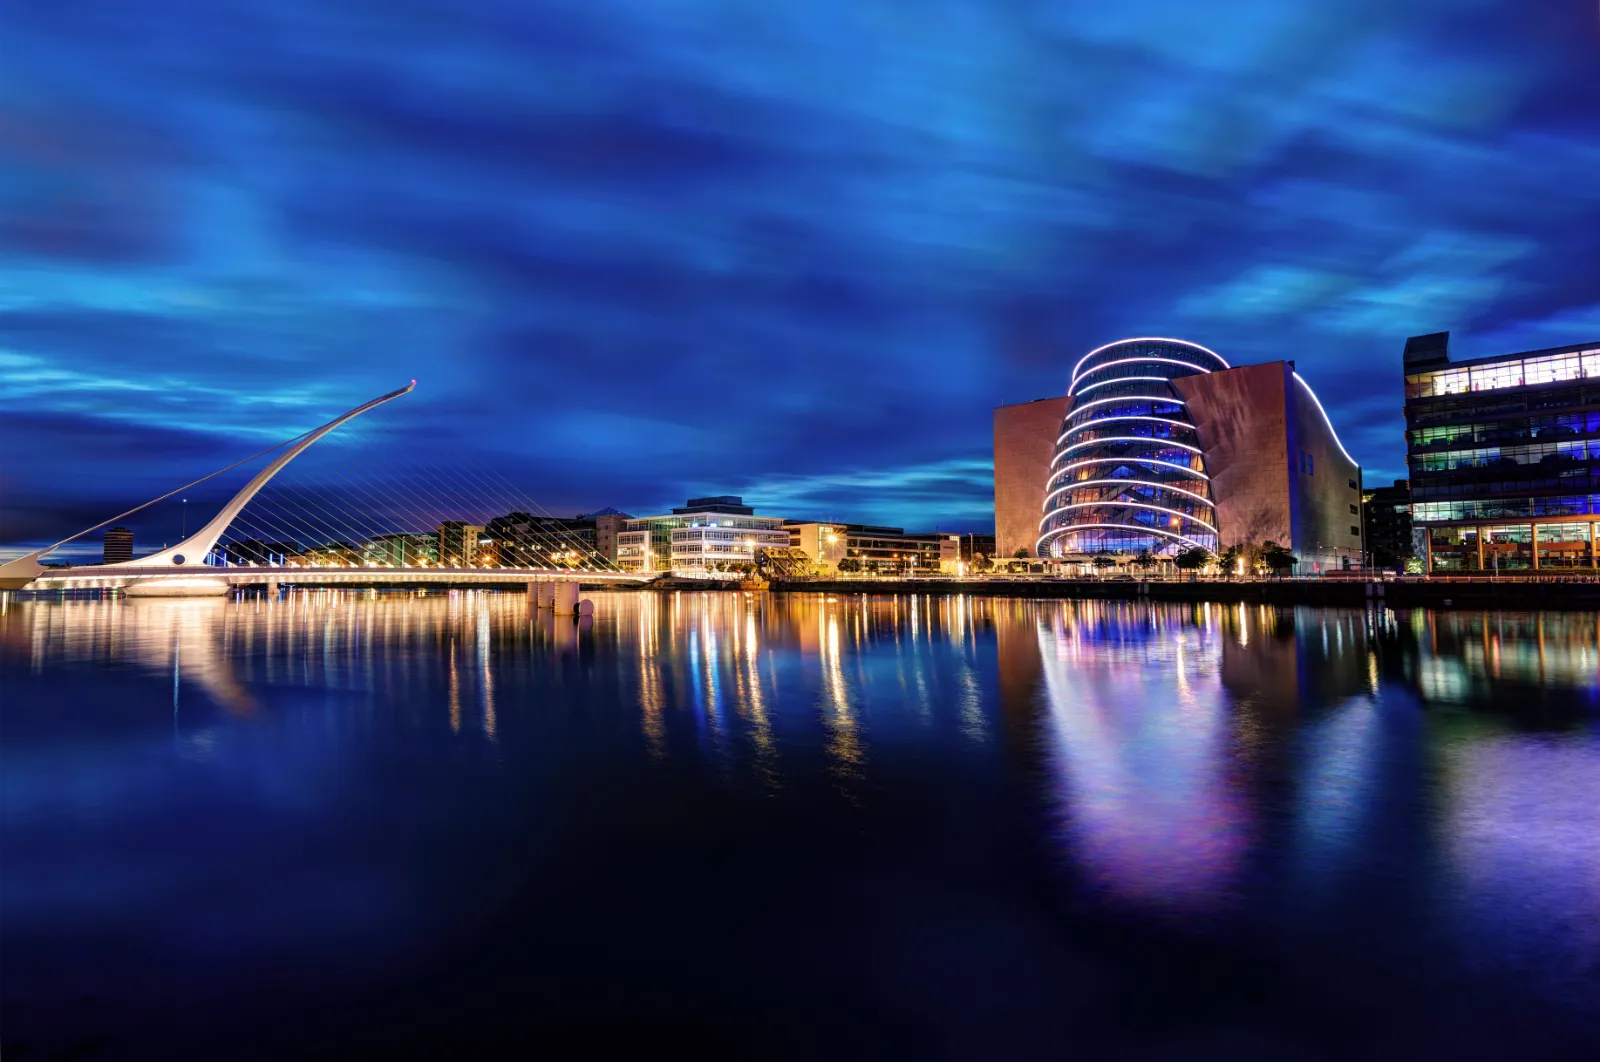 Samuel Beckett bridge in Dublin at night, to represent going to Ireland after completing a Verification of Identity Form.